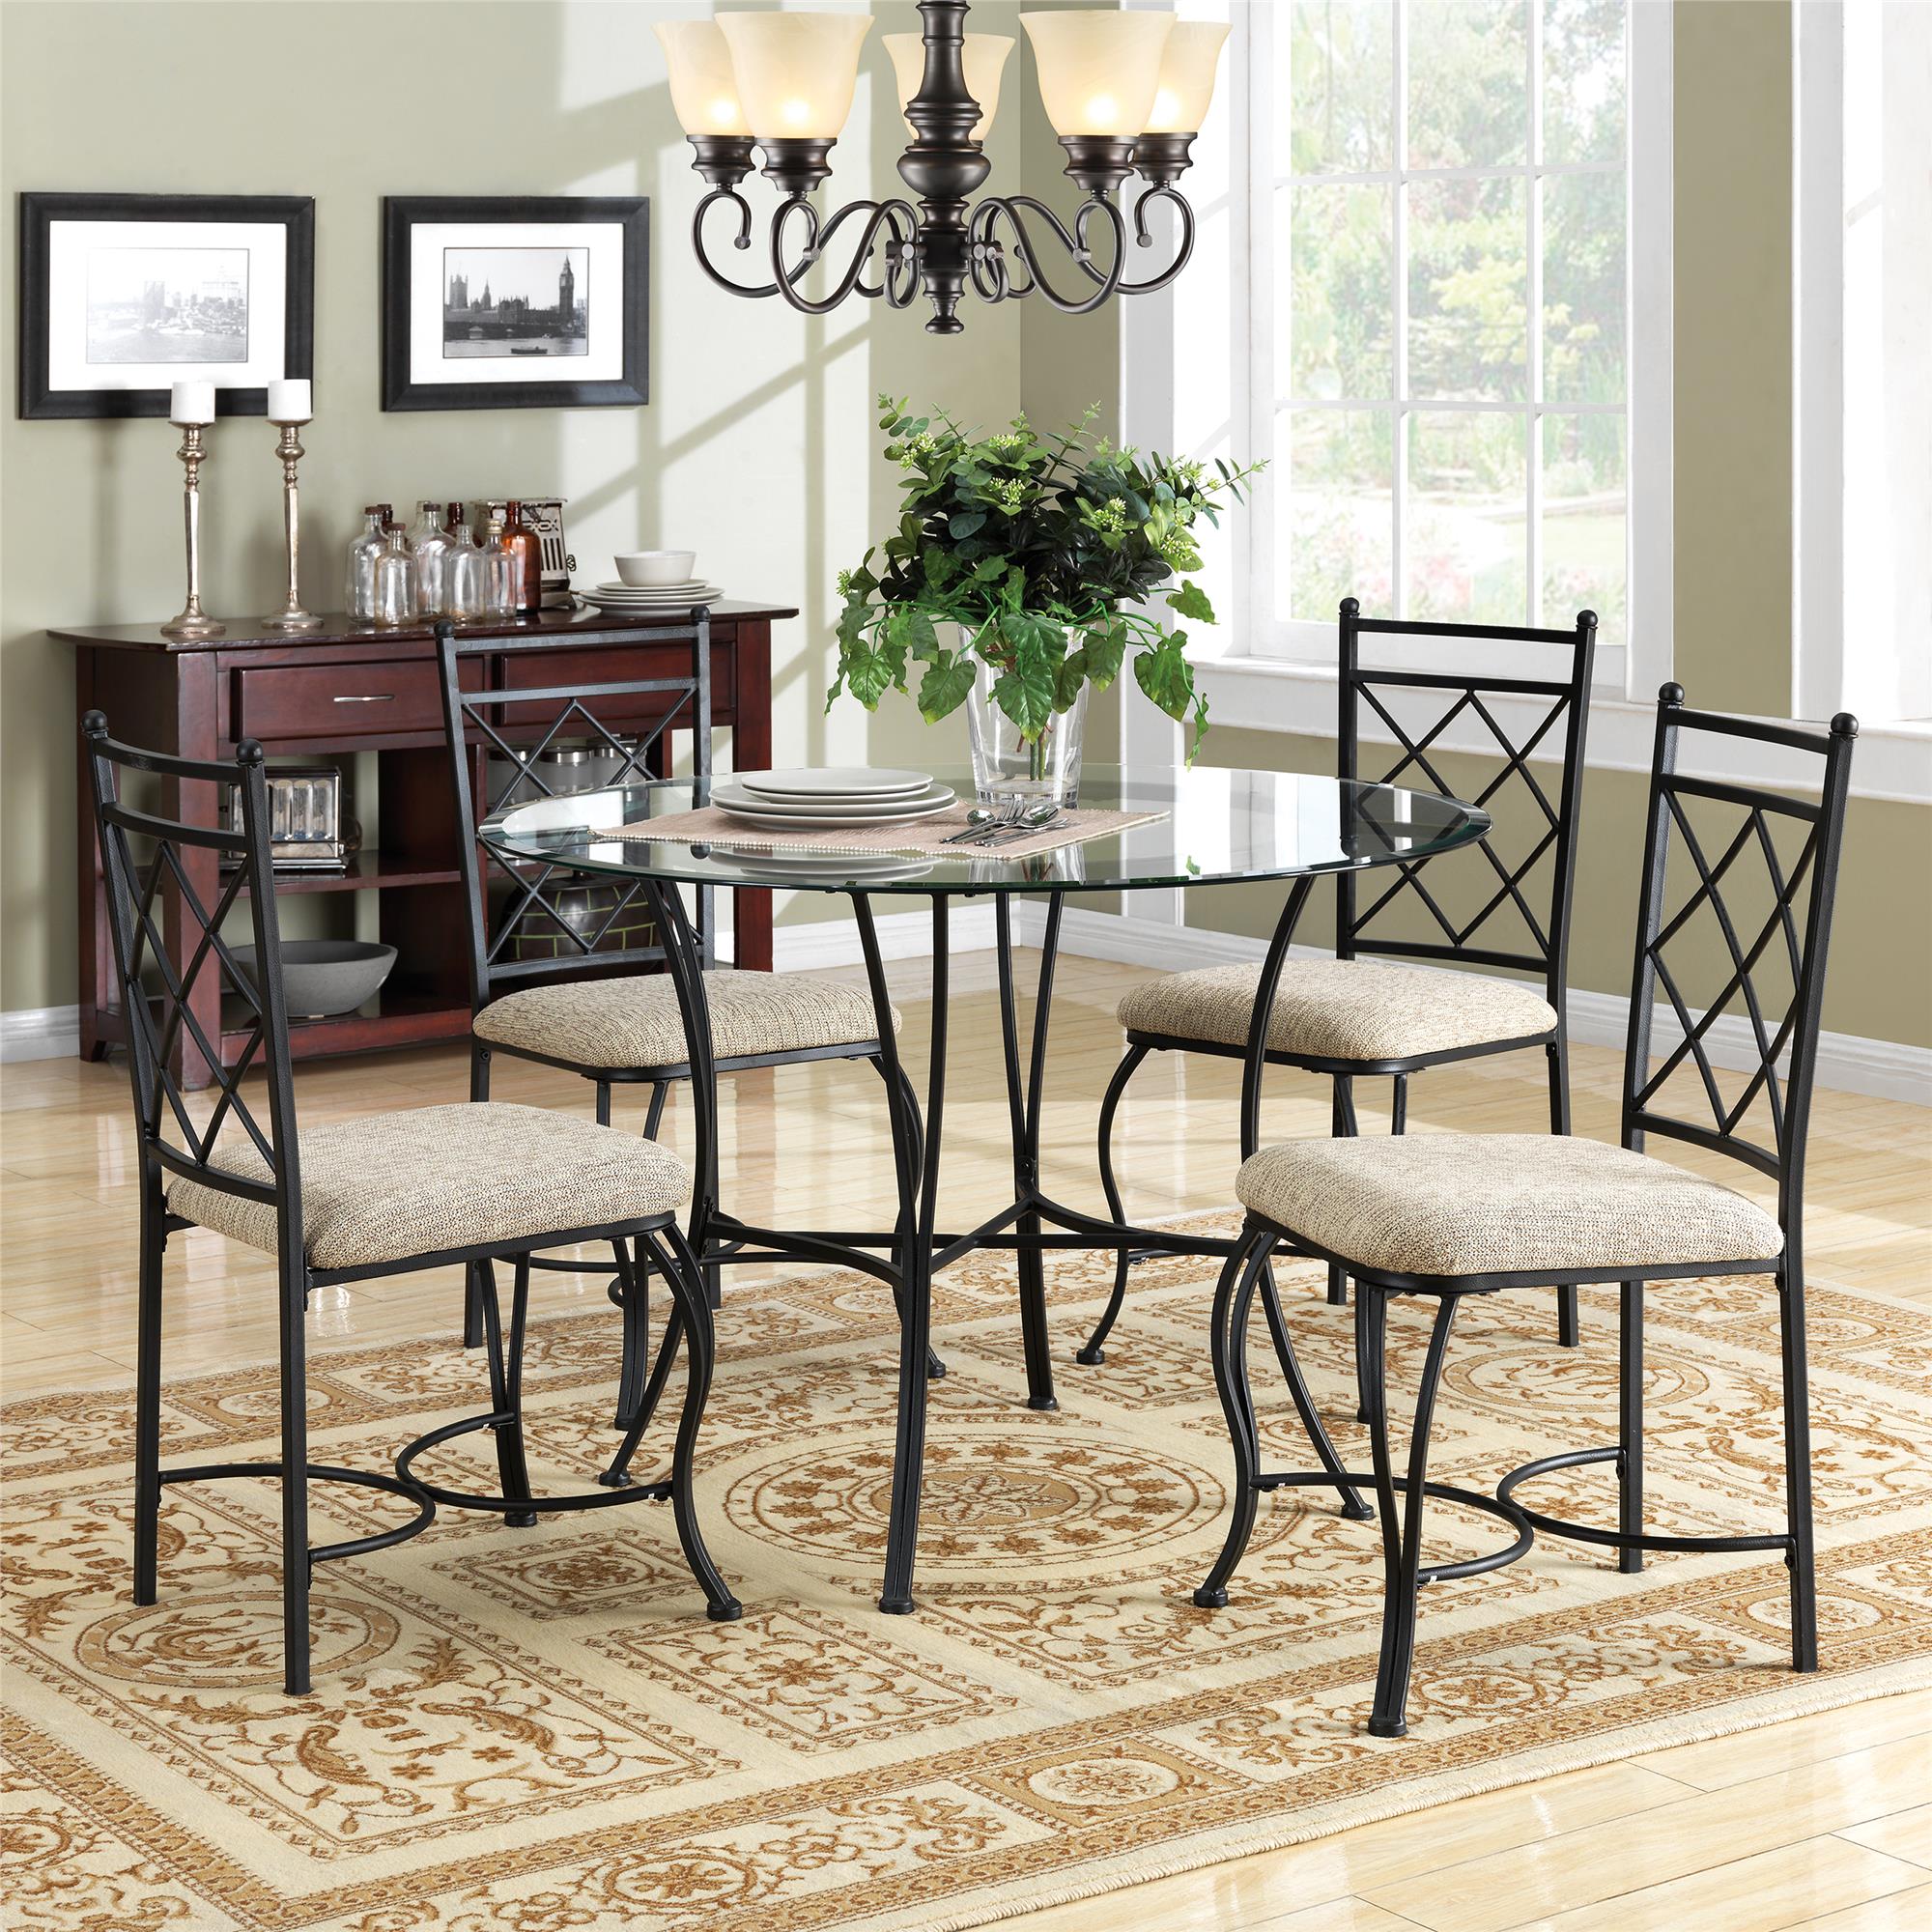 DHP Traditional 5-Piece Metal Dining Set, Glass Top Round Table and 4 Upholstered Seat Chairs - image 2 of 12